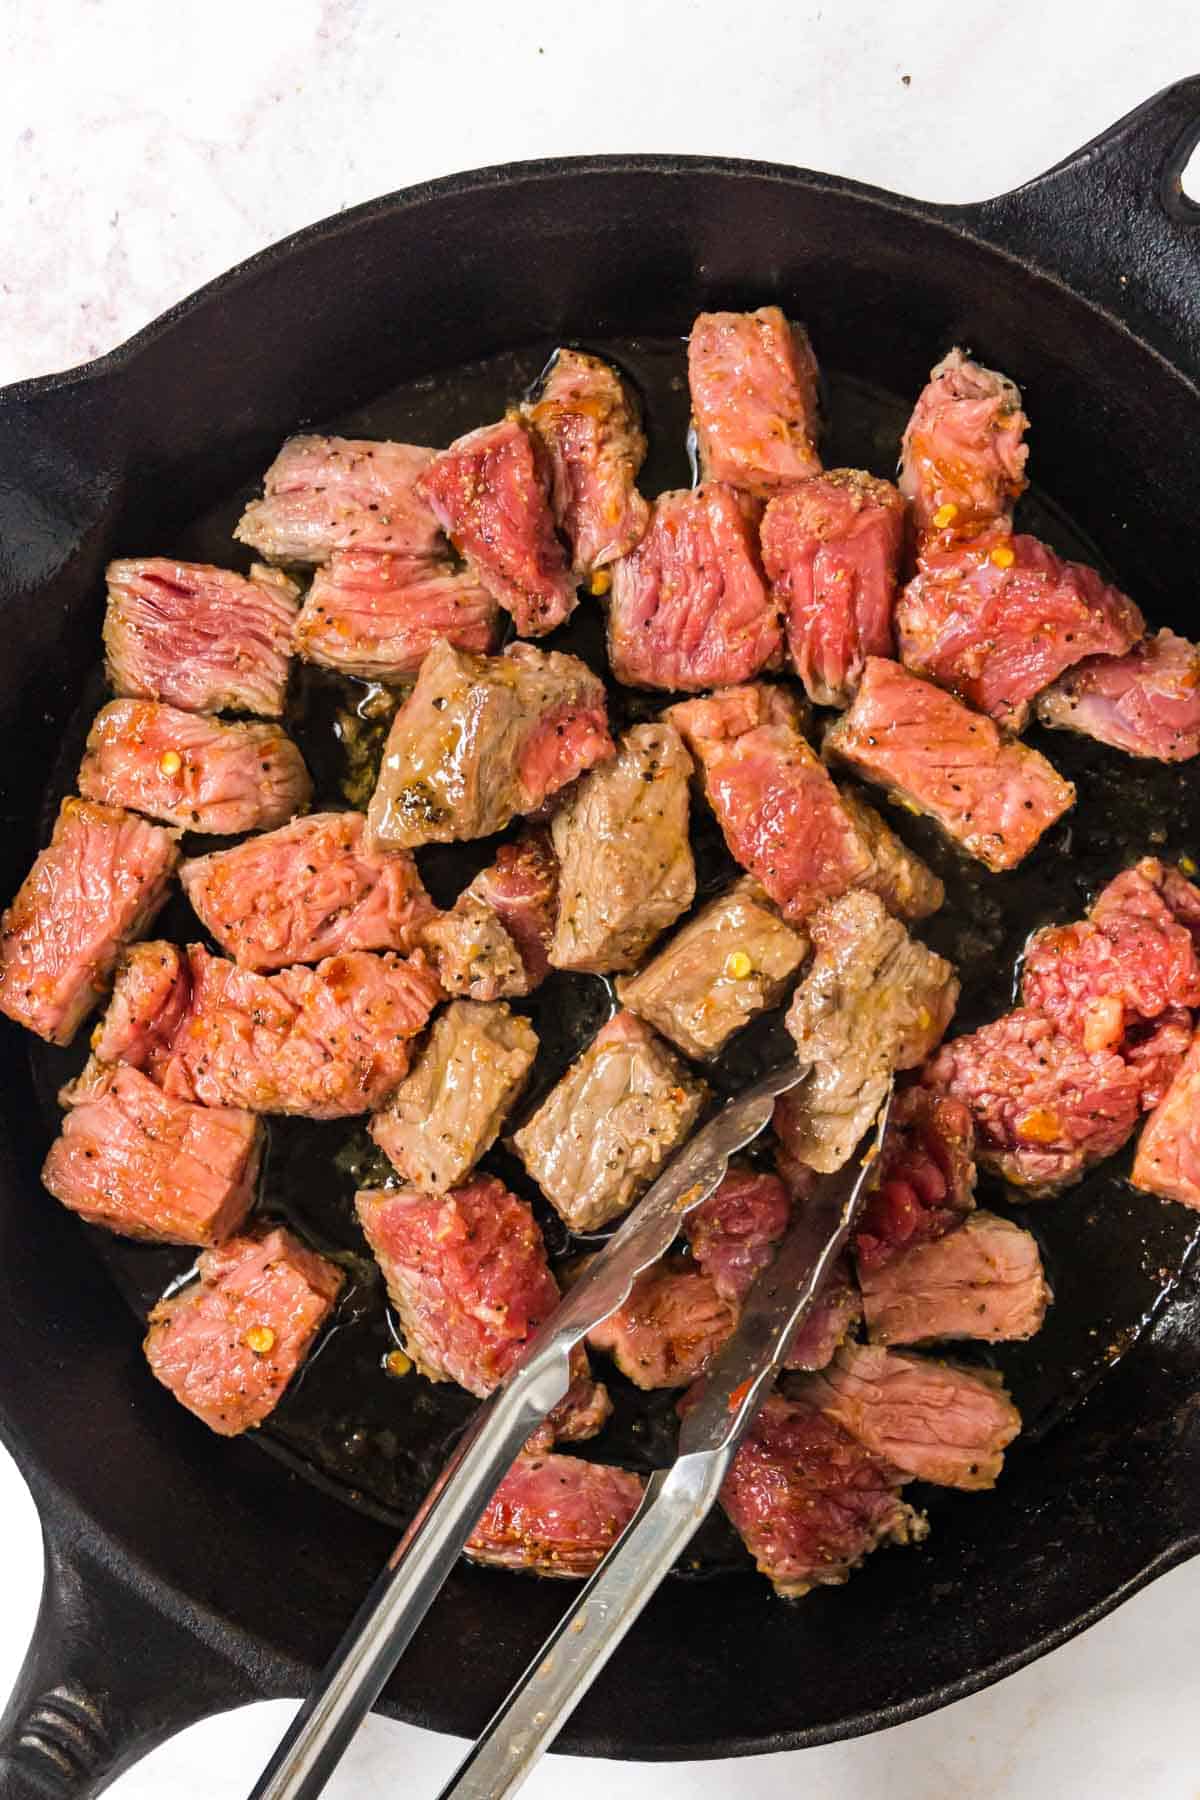 Flipping the steak bites in the cast iron skillet with tongs.